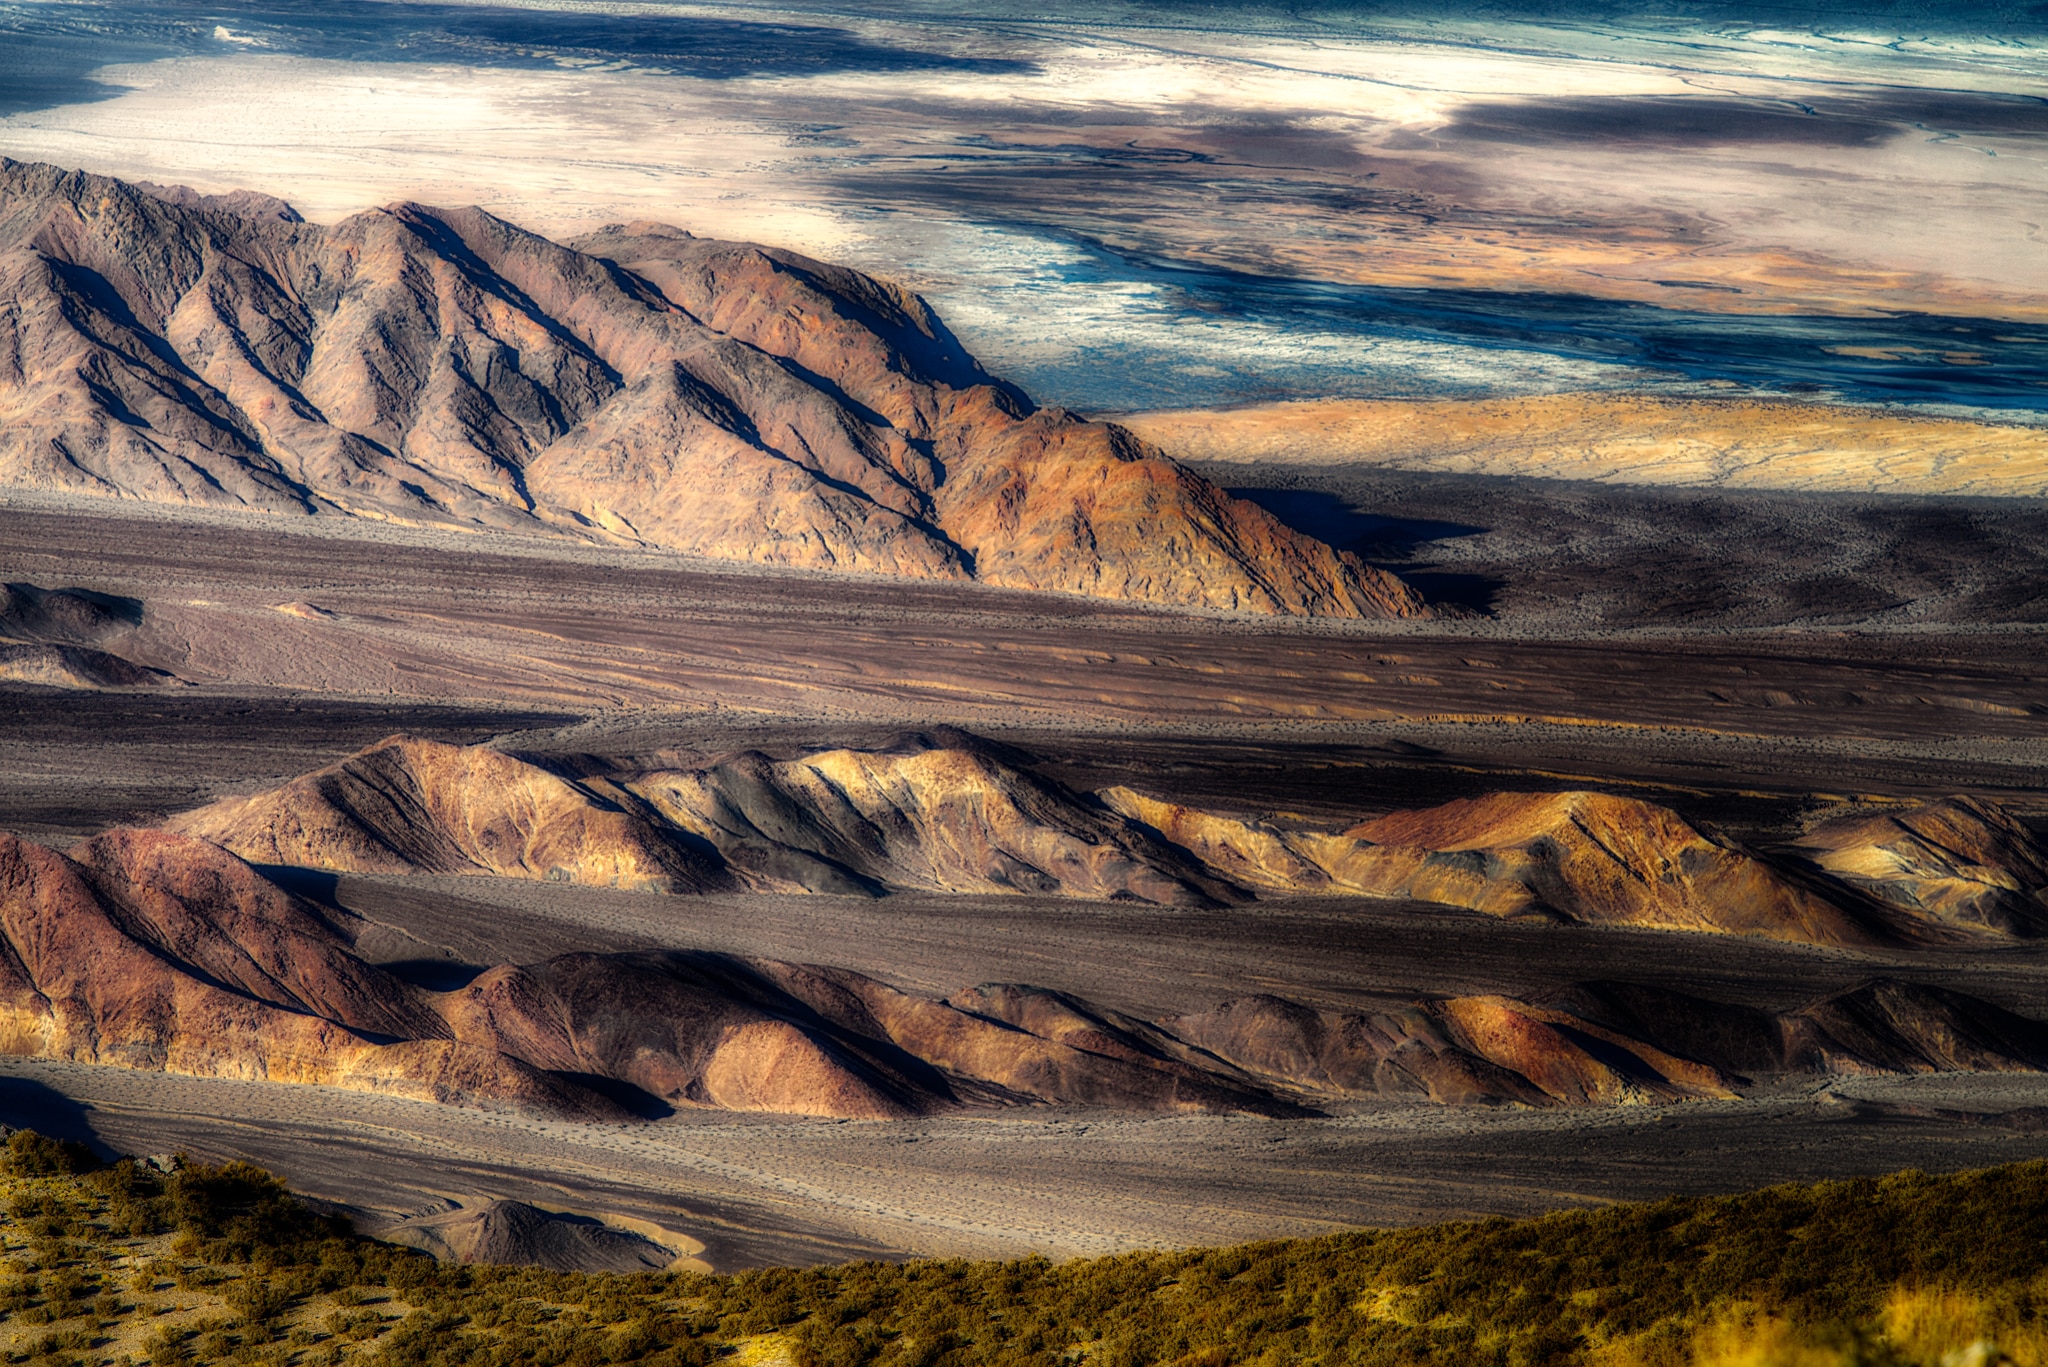 From Aguereberry Point, accessible by a dirt road off Emigrant Canyon Road in Death Valley National Park, you can see rills and valleys filled with erosional alluvium scoured out of the Panamint Range into the Death Valley Basin.